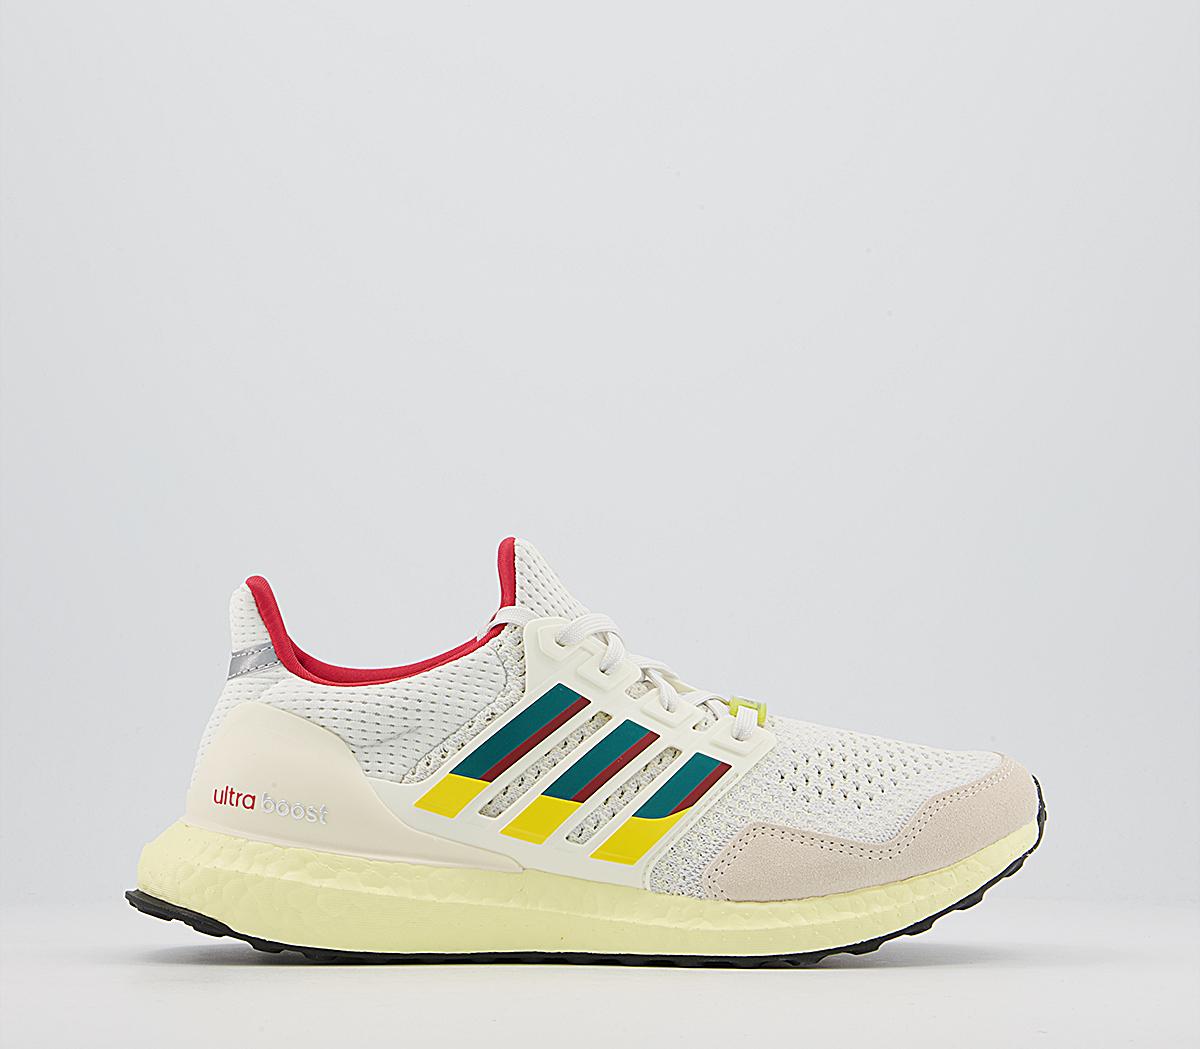 adidasUltraboost Dna 1.0 X Zx 000 TrainersWhite Green Scarlet